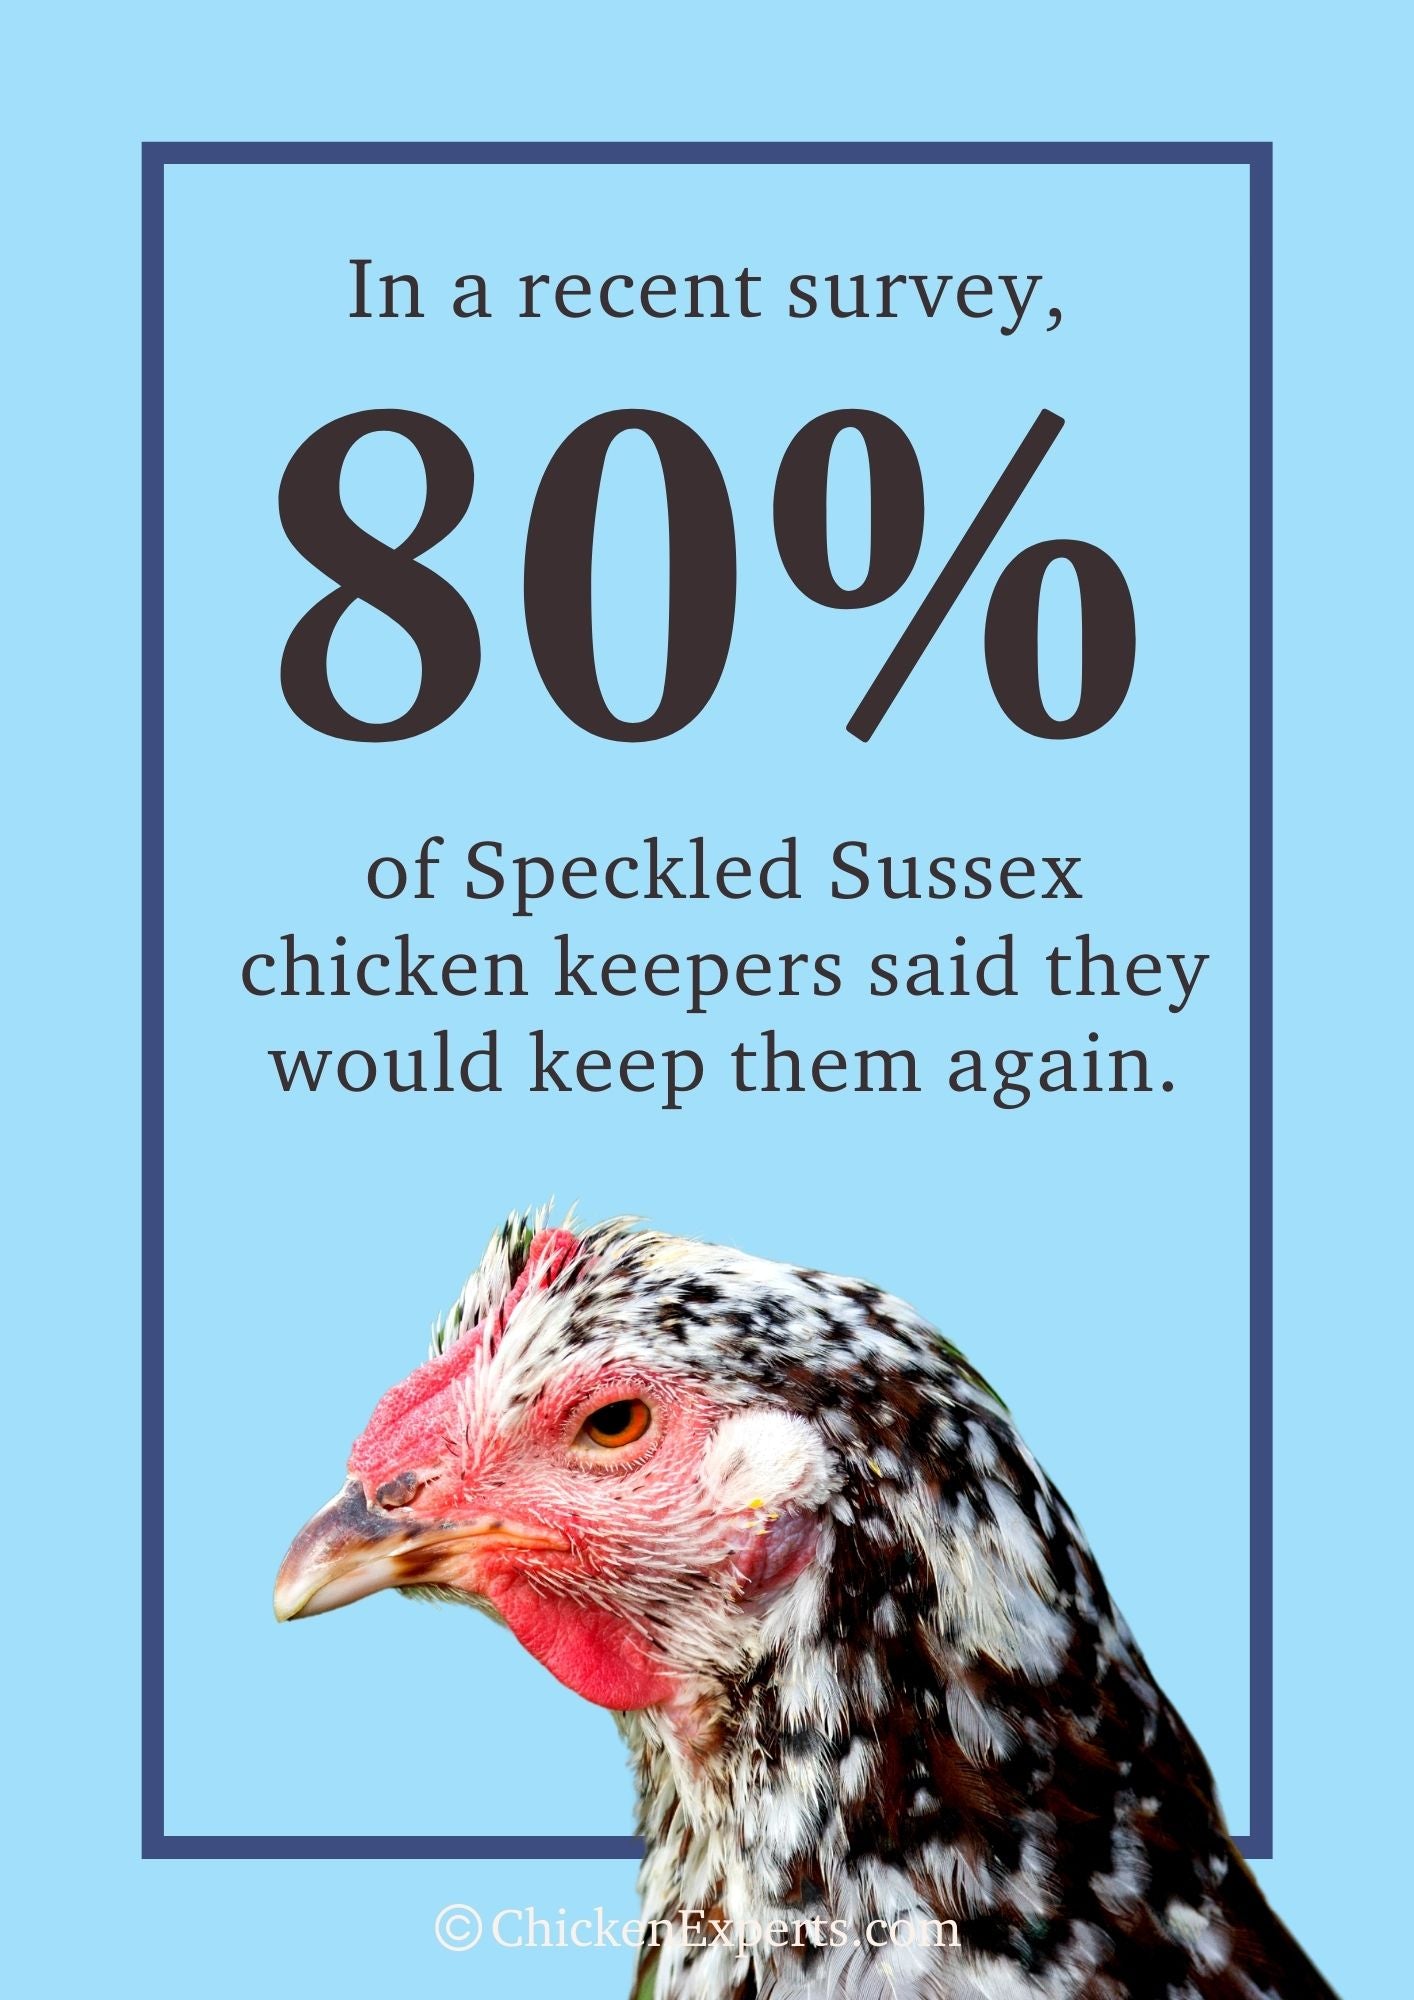 speckled sussex chicken keepers said they will keep them again